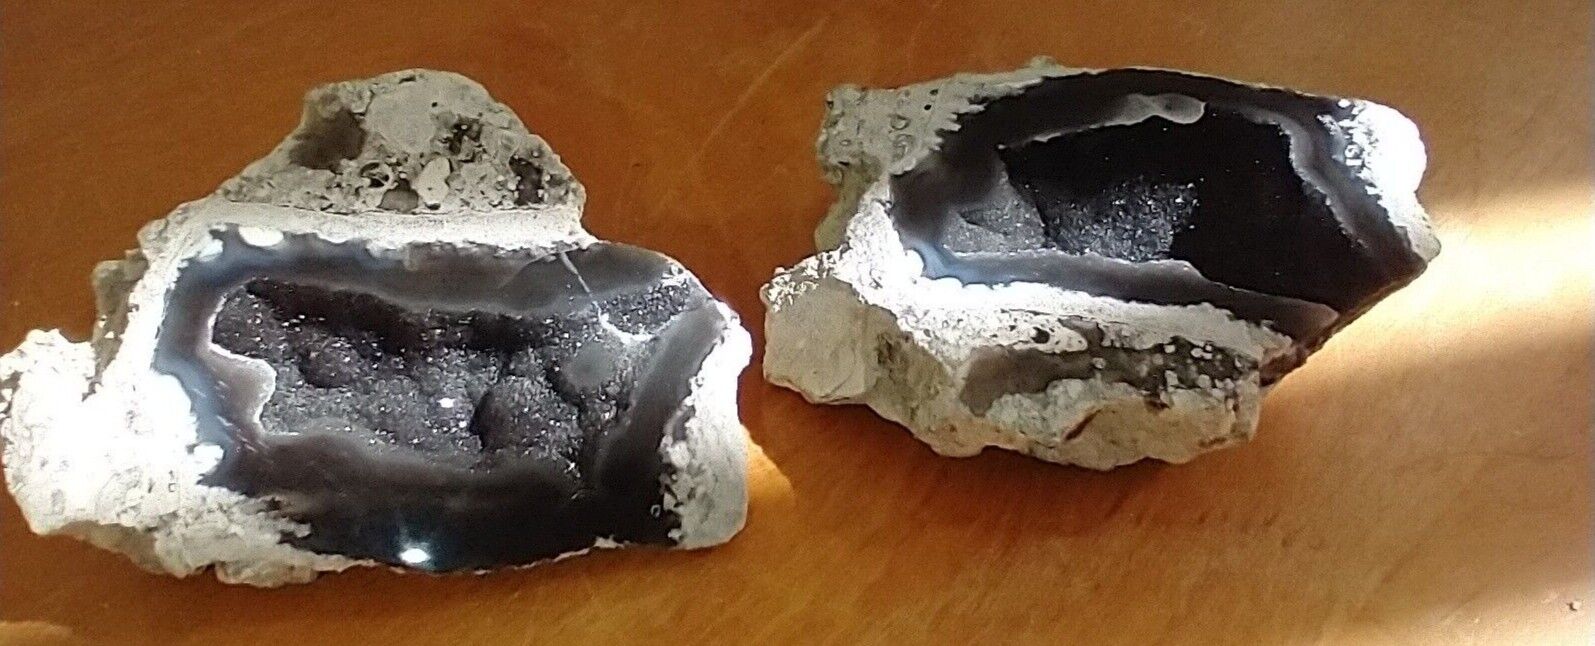 Fine Ballast Point Tampa Bay Agatized Coral Fossil, Cut Polished Pair #4